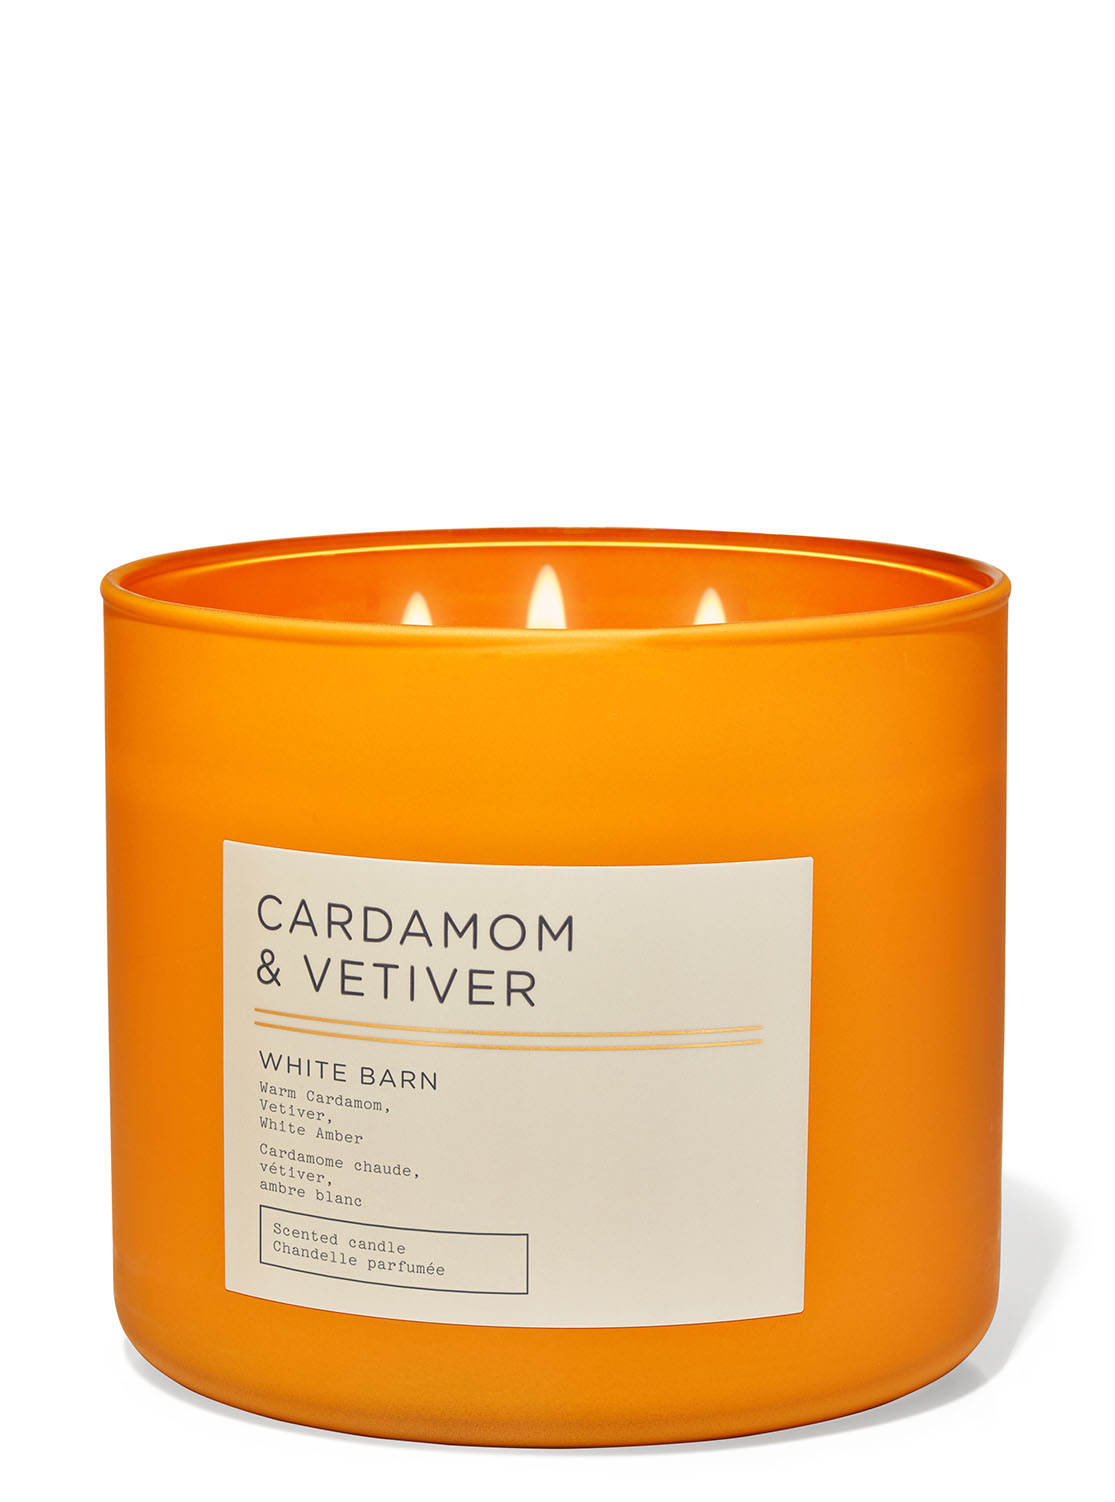 Cardamom & Vetiver 3-Wick Candle | Bath and Body Works